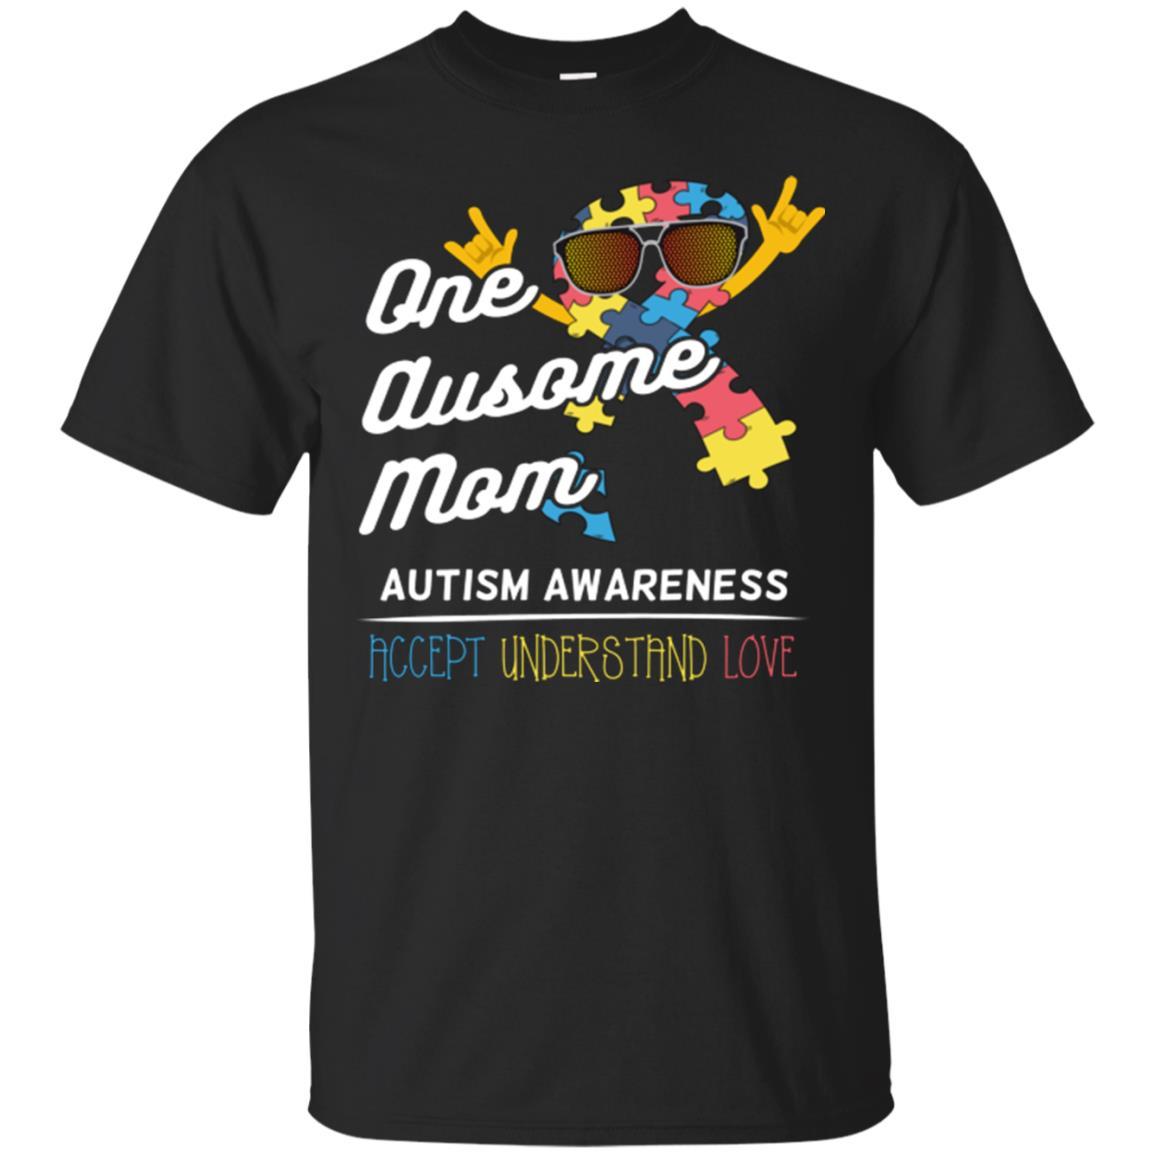 Autism Awareness Shirts Autism Shirts For Awesome Mom